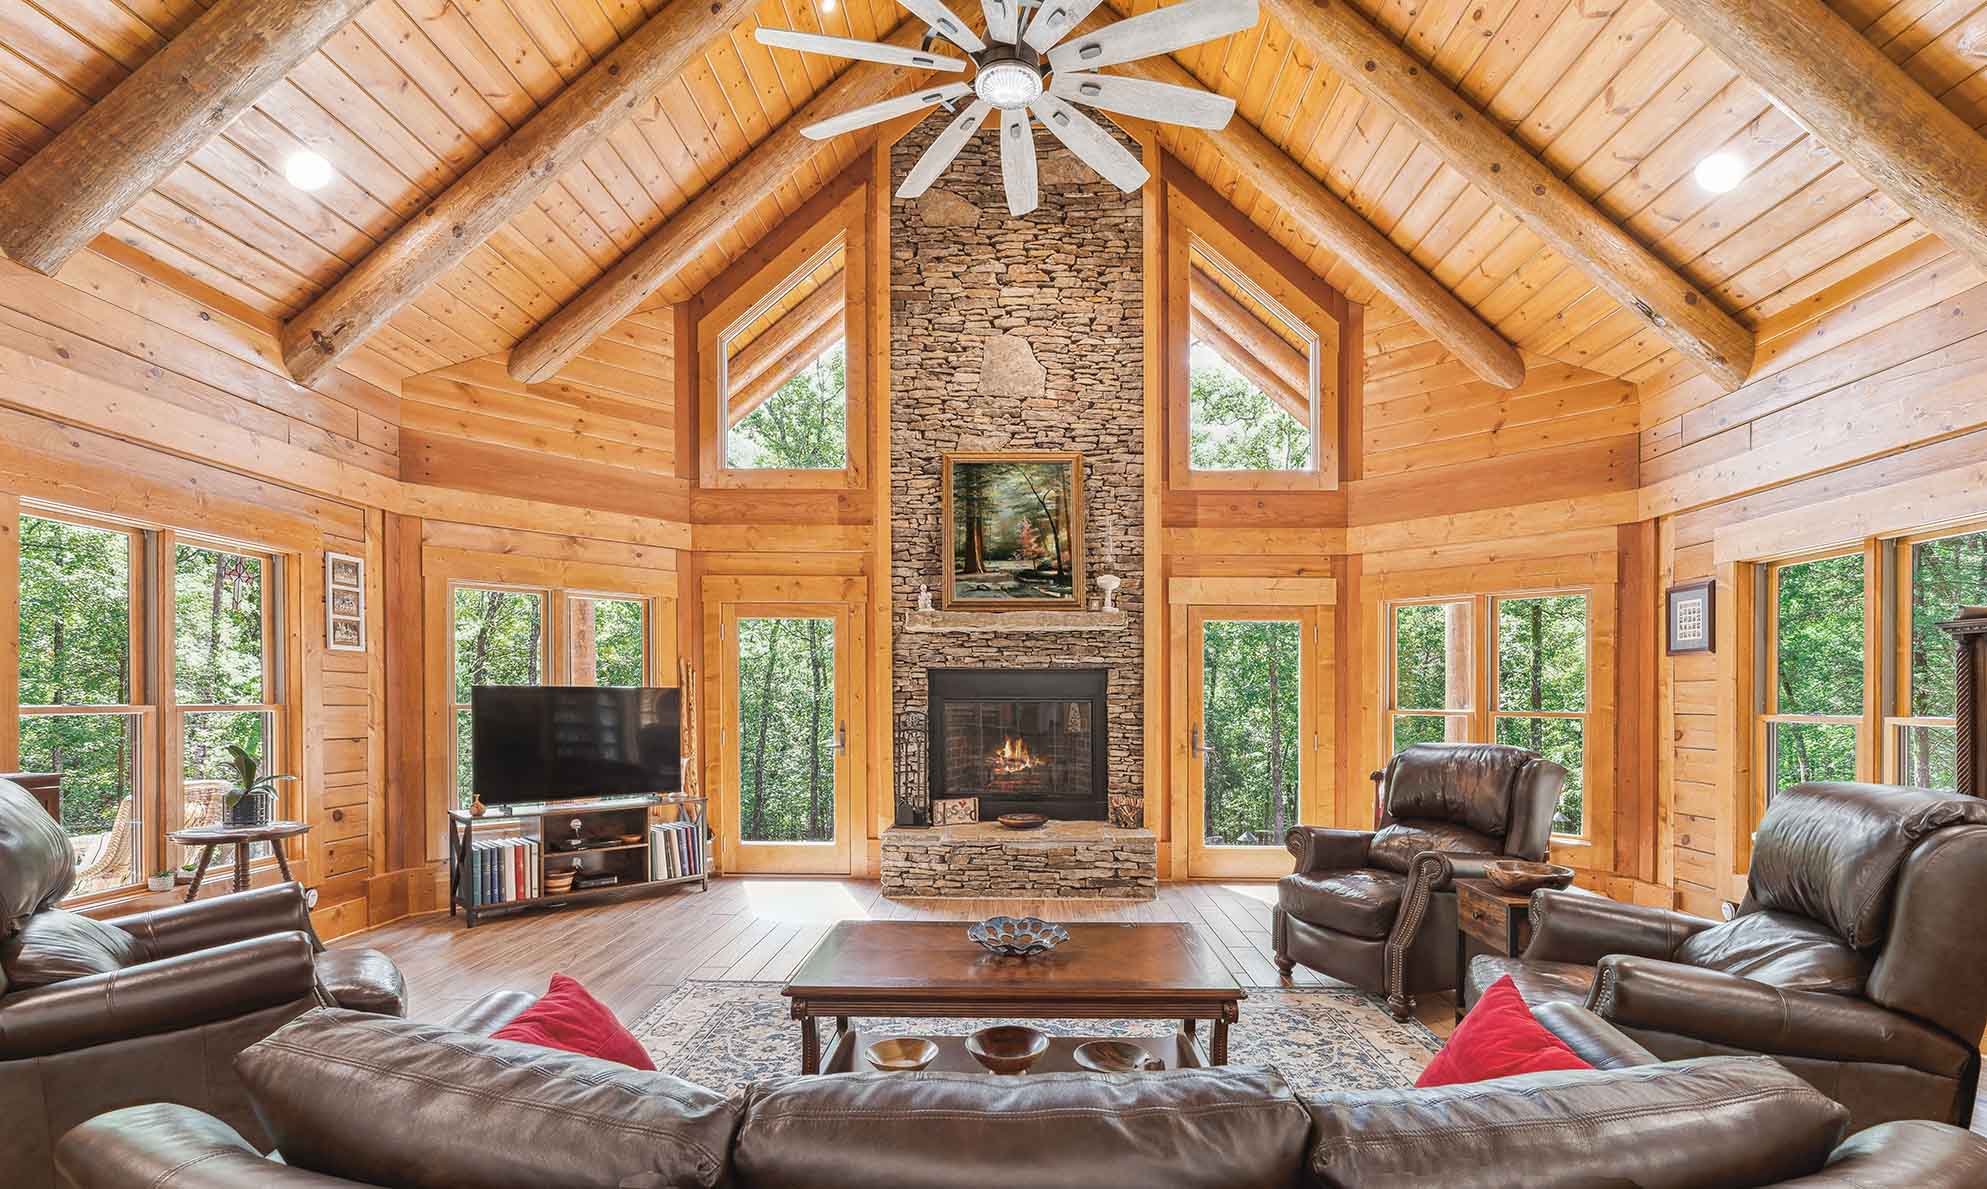 Fireplace Accessories for the Log Home